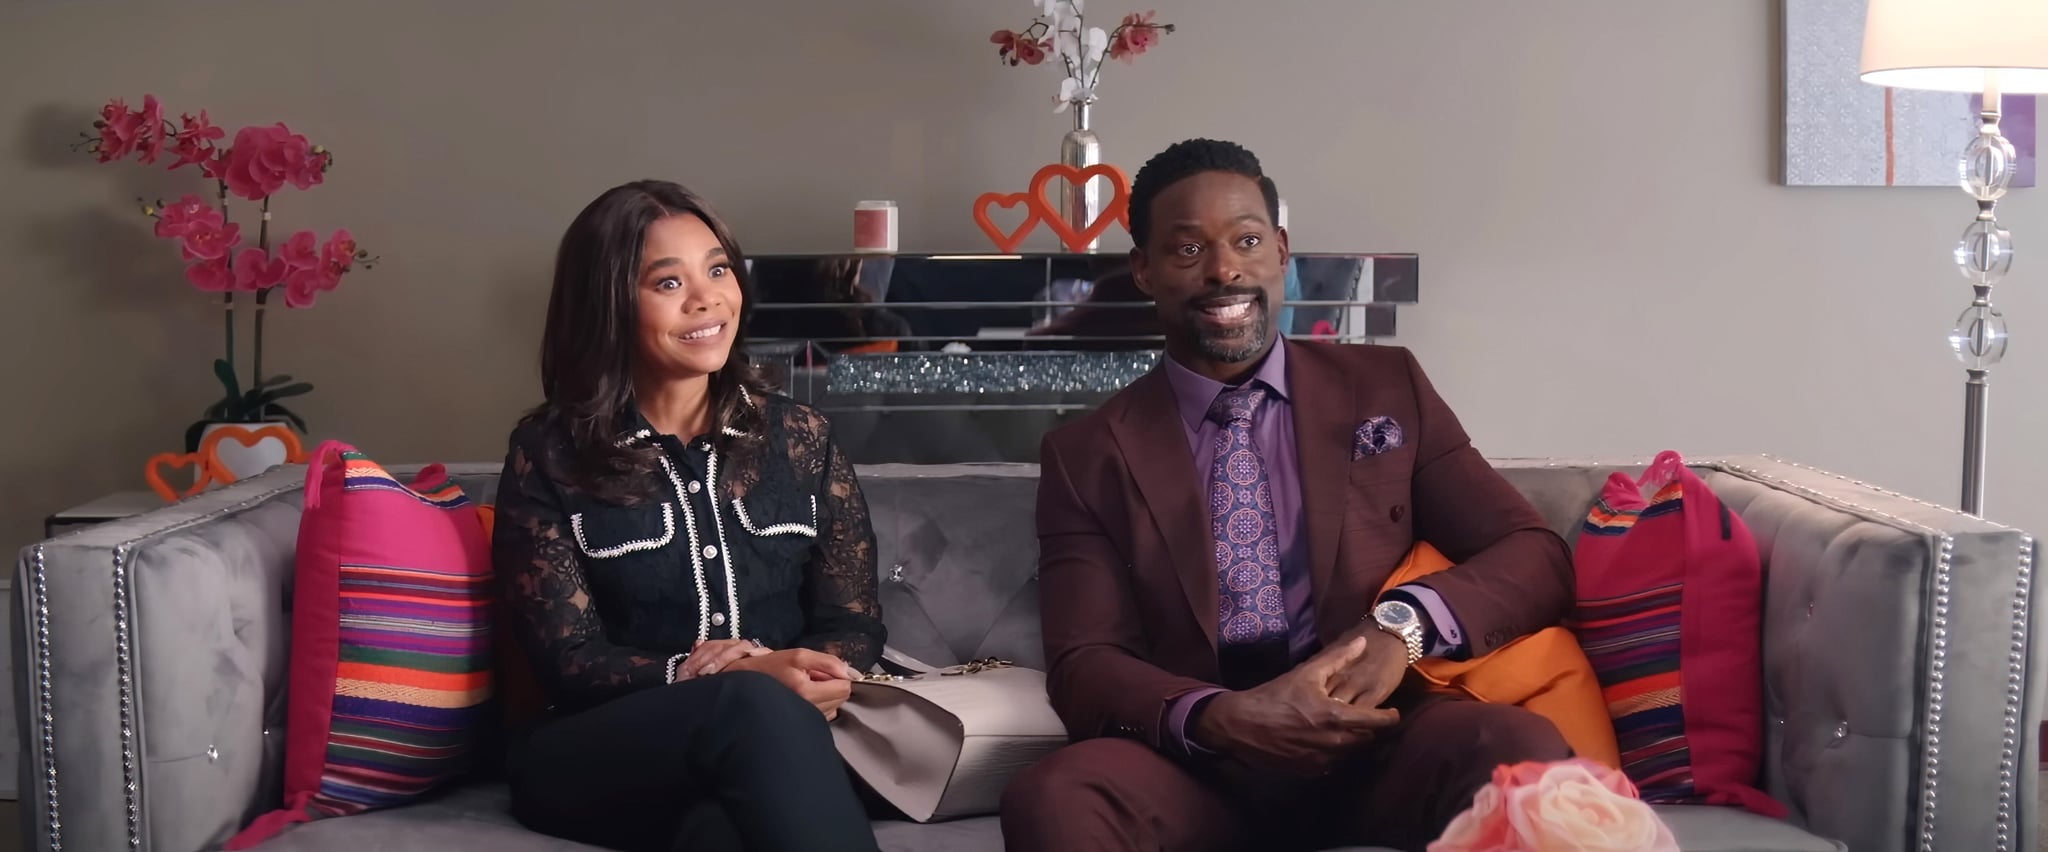 HONK FOR JESUS. SAVE YOUR SOUL., from left: Regina Hall, Sterling K. Brown, 2022.  Focus Features /Courtesy Everett Collection